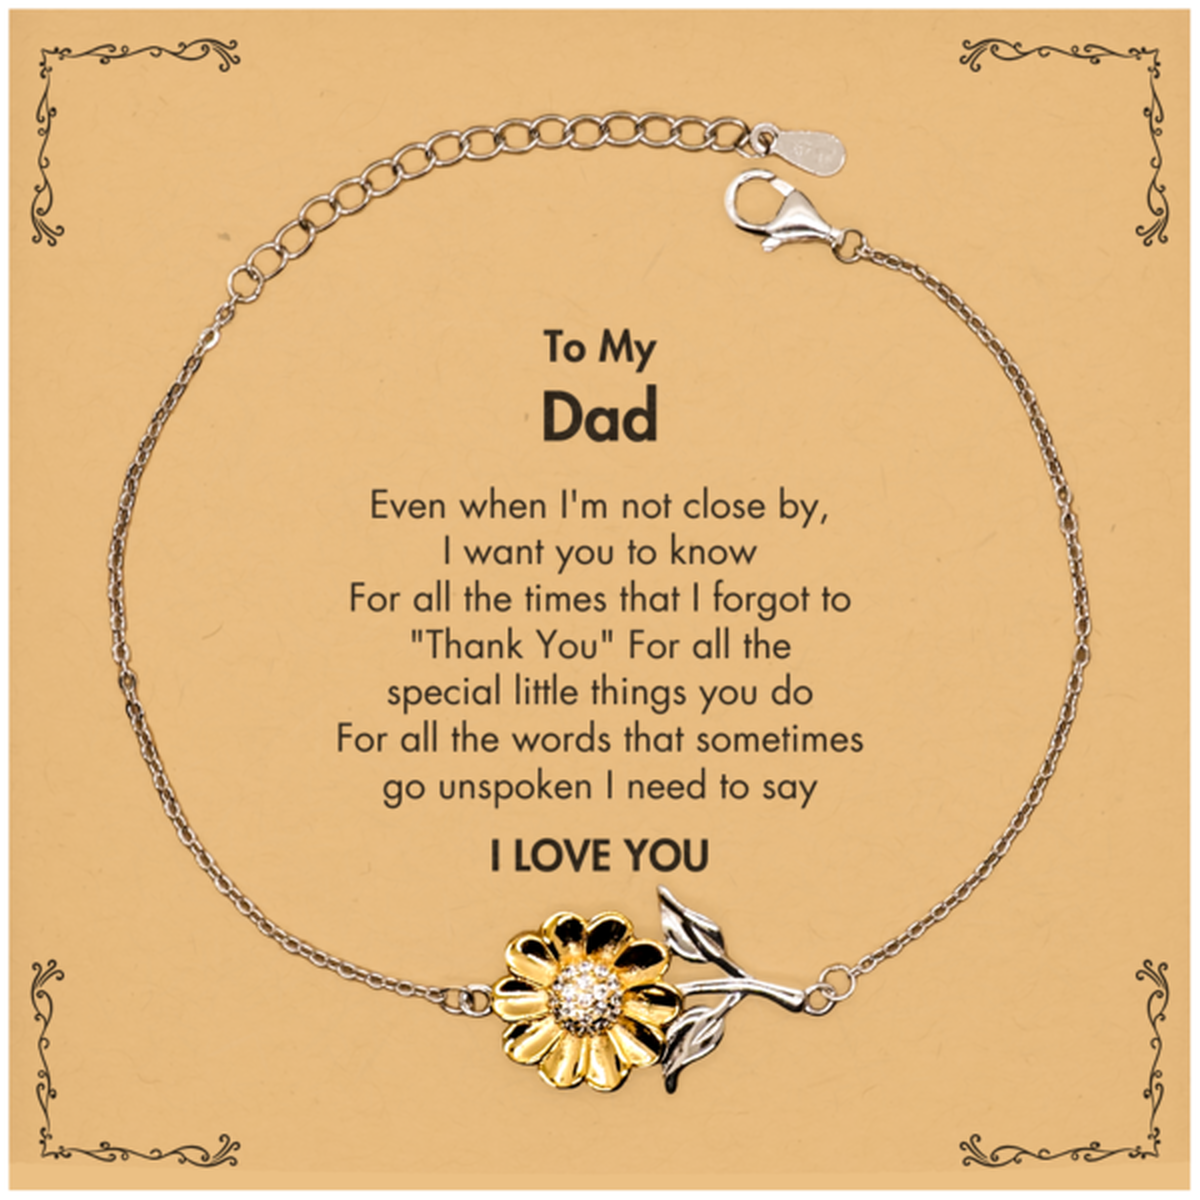 Thank You Gifts for Dad, Keepsake Sunflower Bracelet Gifts for Dad Birthday Mother's day Father's Day Dad For all the words That sometimes go unspoken I need to say I LOVE YOU